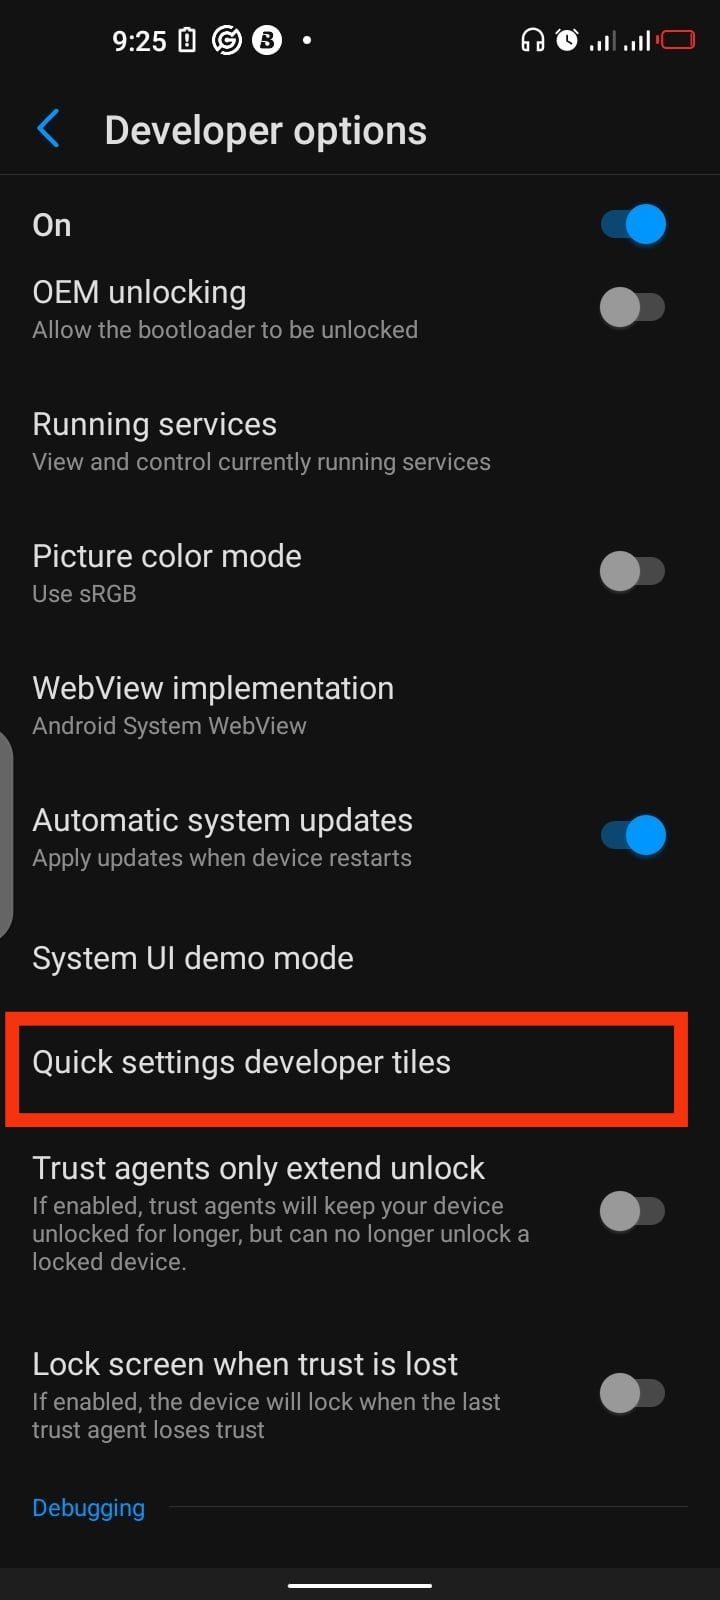 Android settings screen showing the quick settings developer tiles option